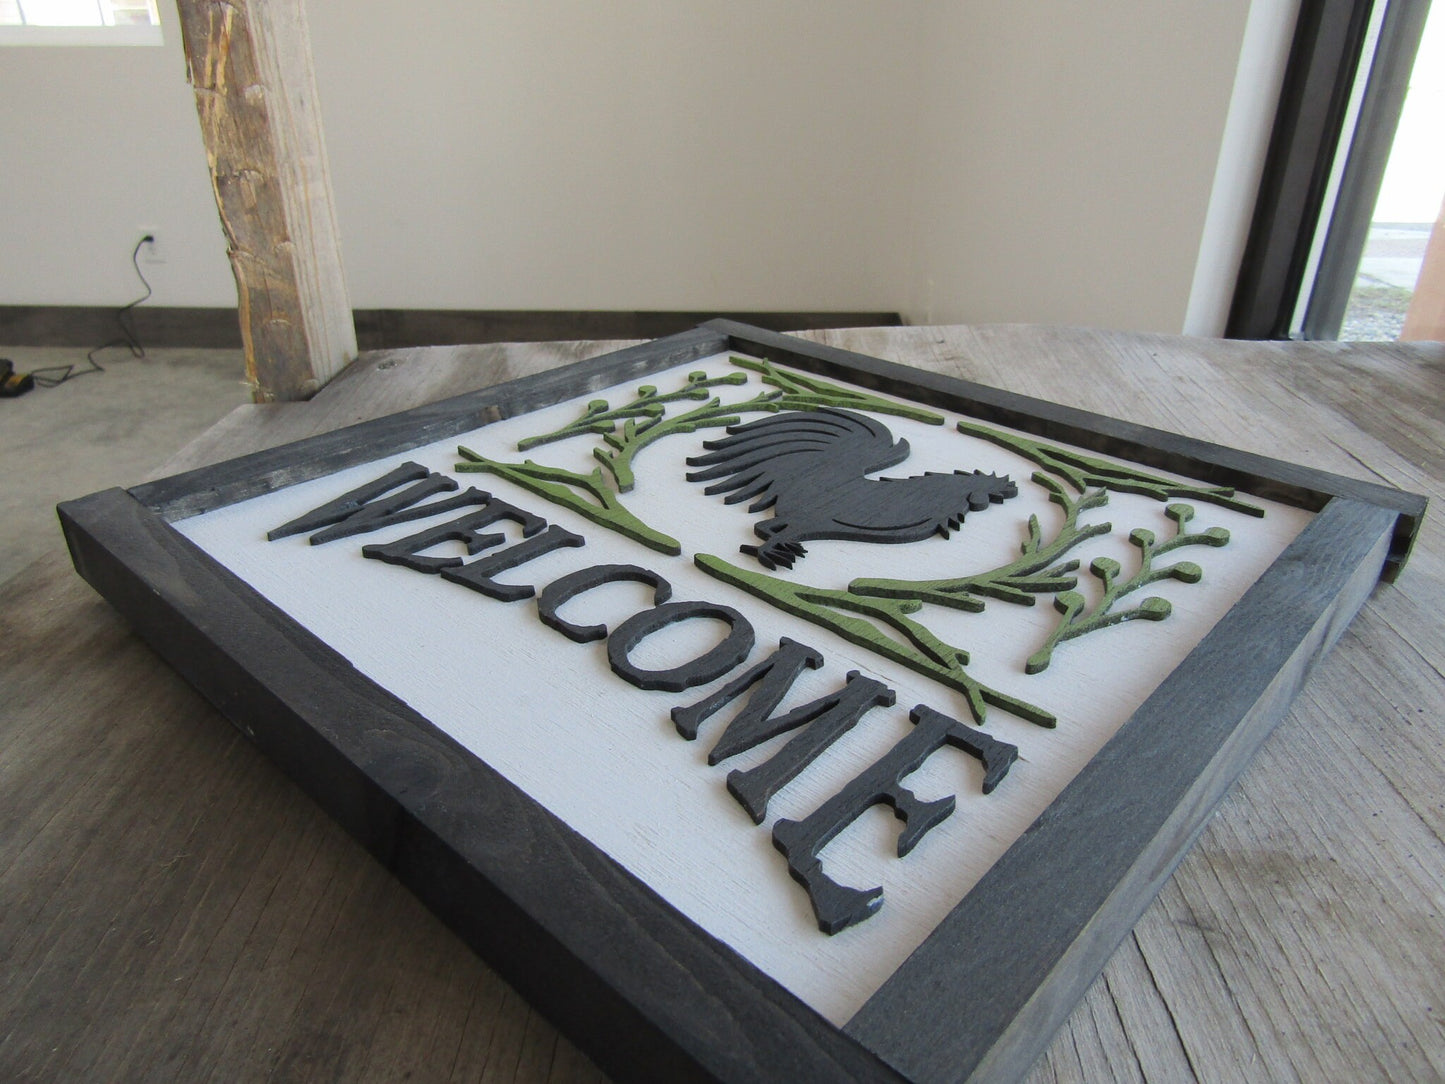 Farmhouse Welcome Rustic Rooster Chicken Coop Framed Wall Decor Handmade 3D Raised Text Farm Eggs Kitchen Decor Mudroom Entryway Welcoming